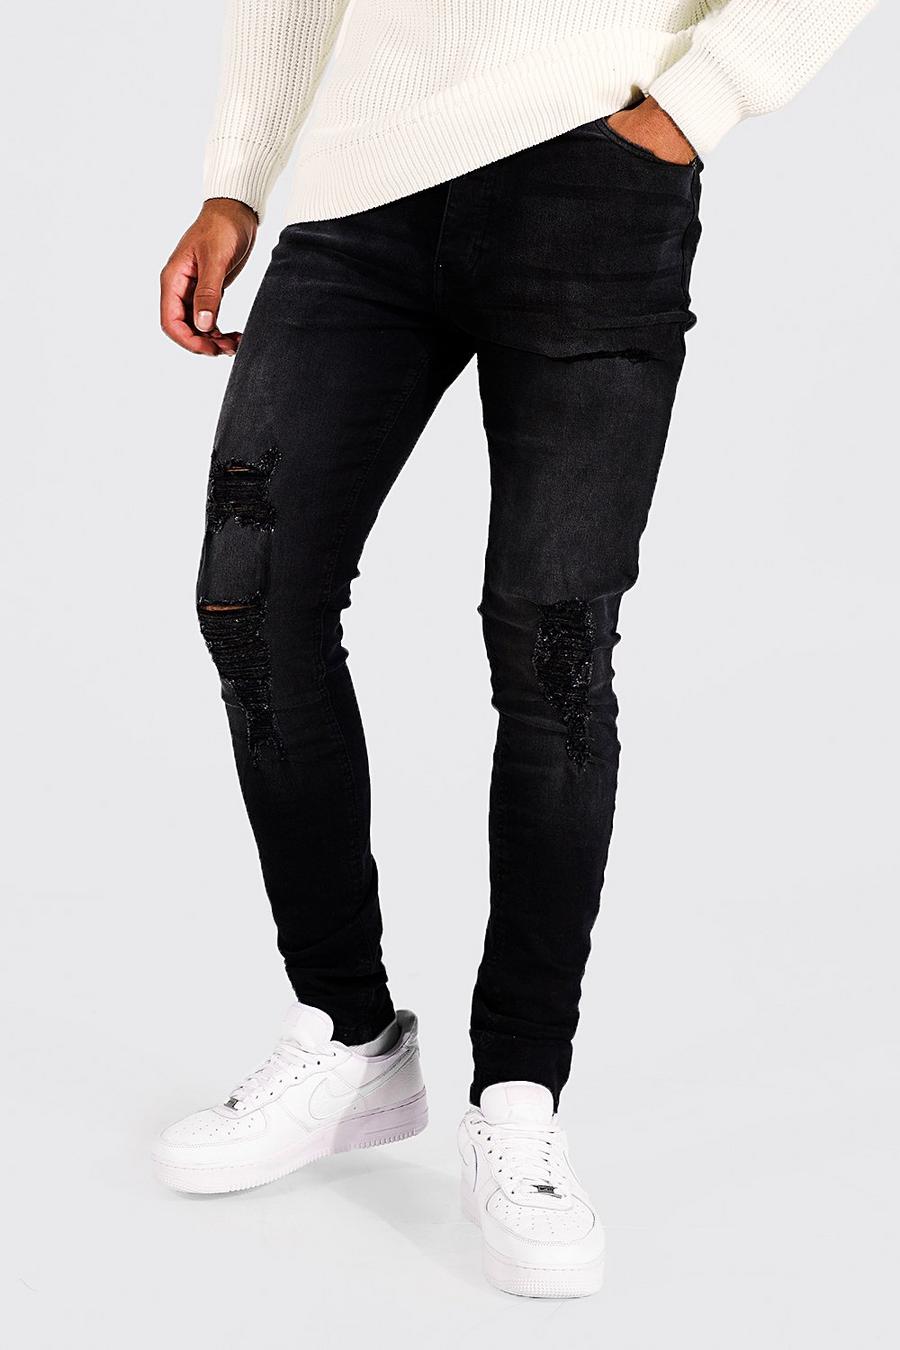 Tall Skinny Fit Jean With All Over Rips | boohoo